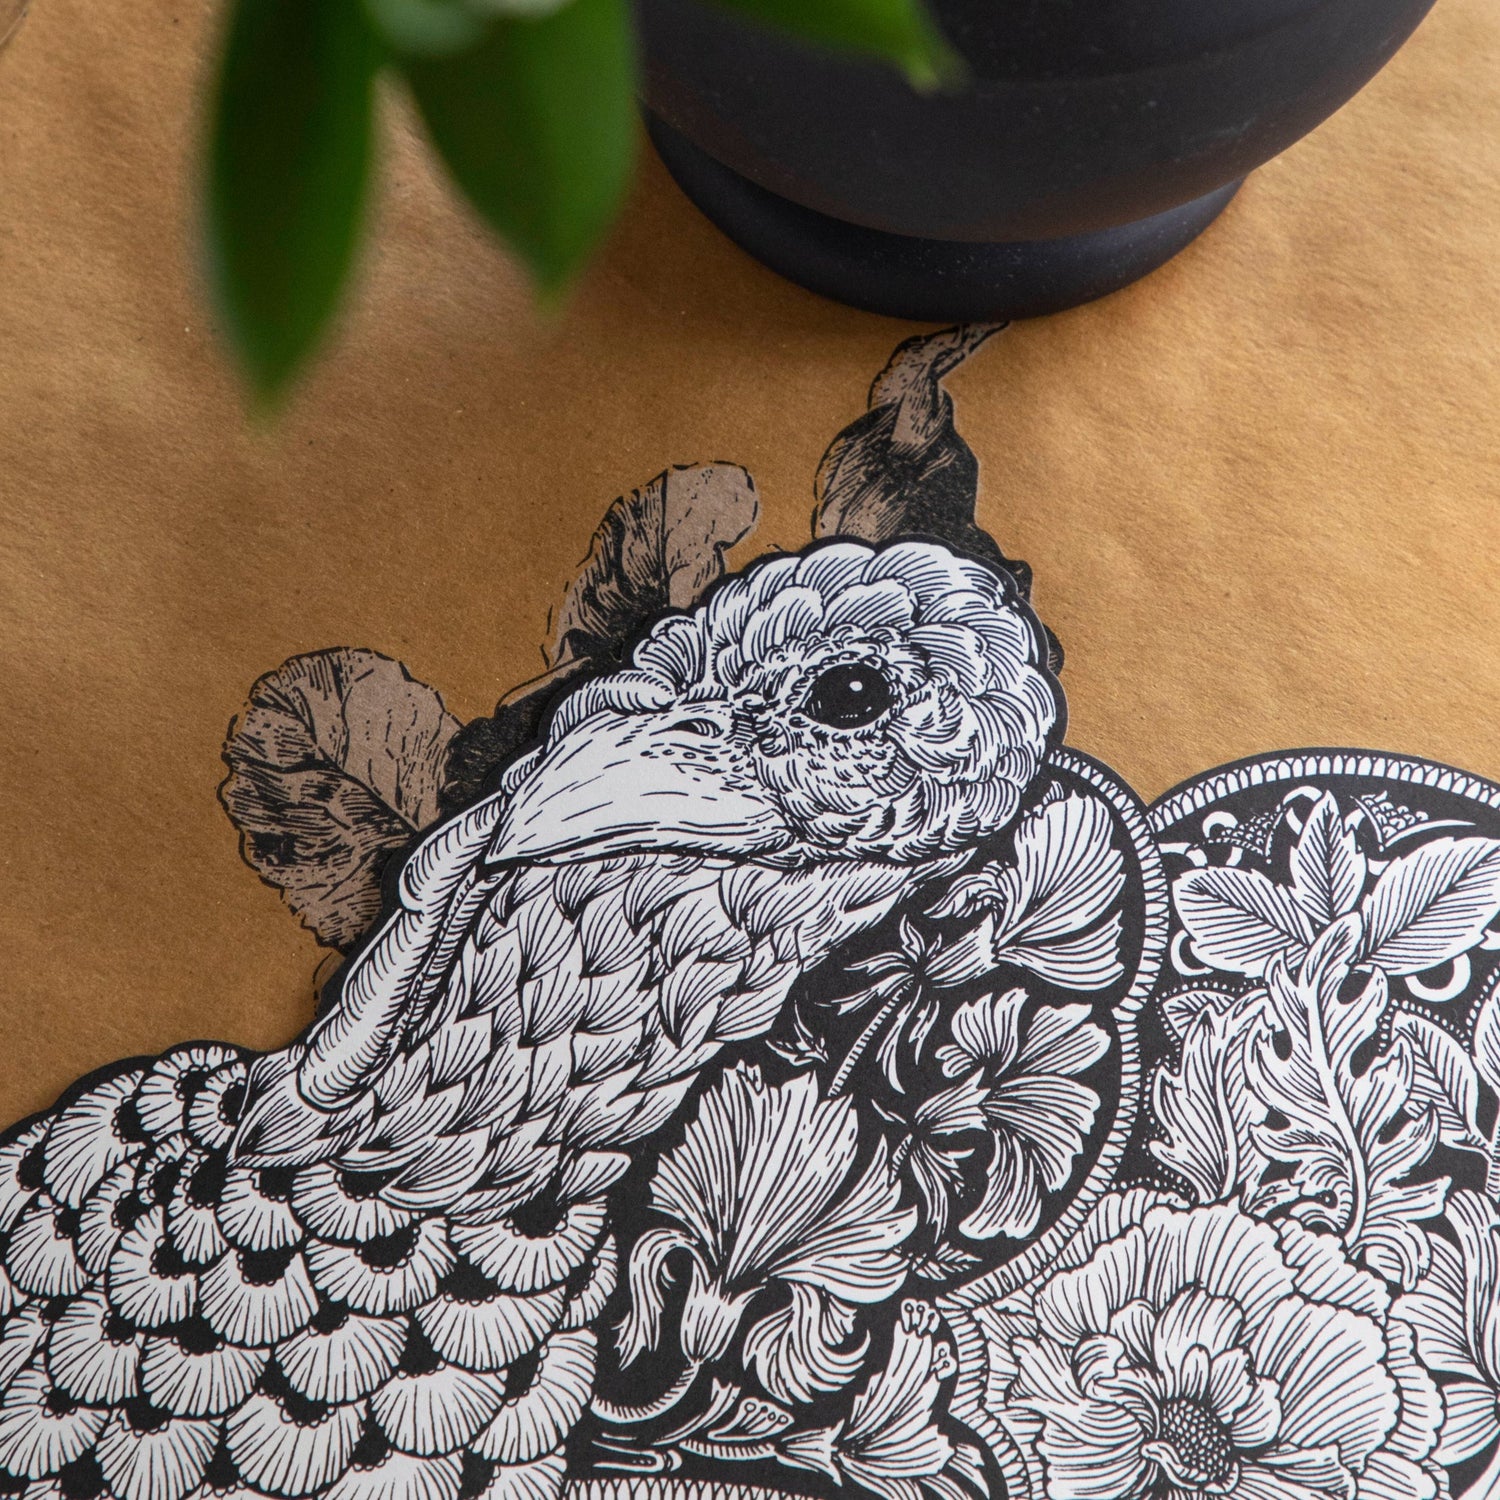 Close-up of the face of the Die-cut Ebony Harvest Turkey Placemat on a table, showing the artwork in detail.